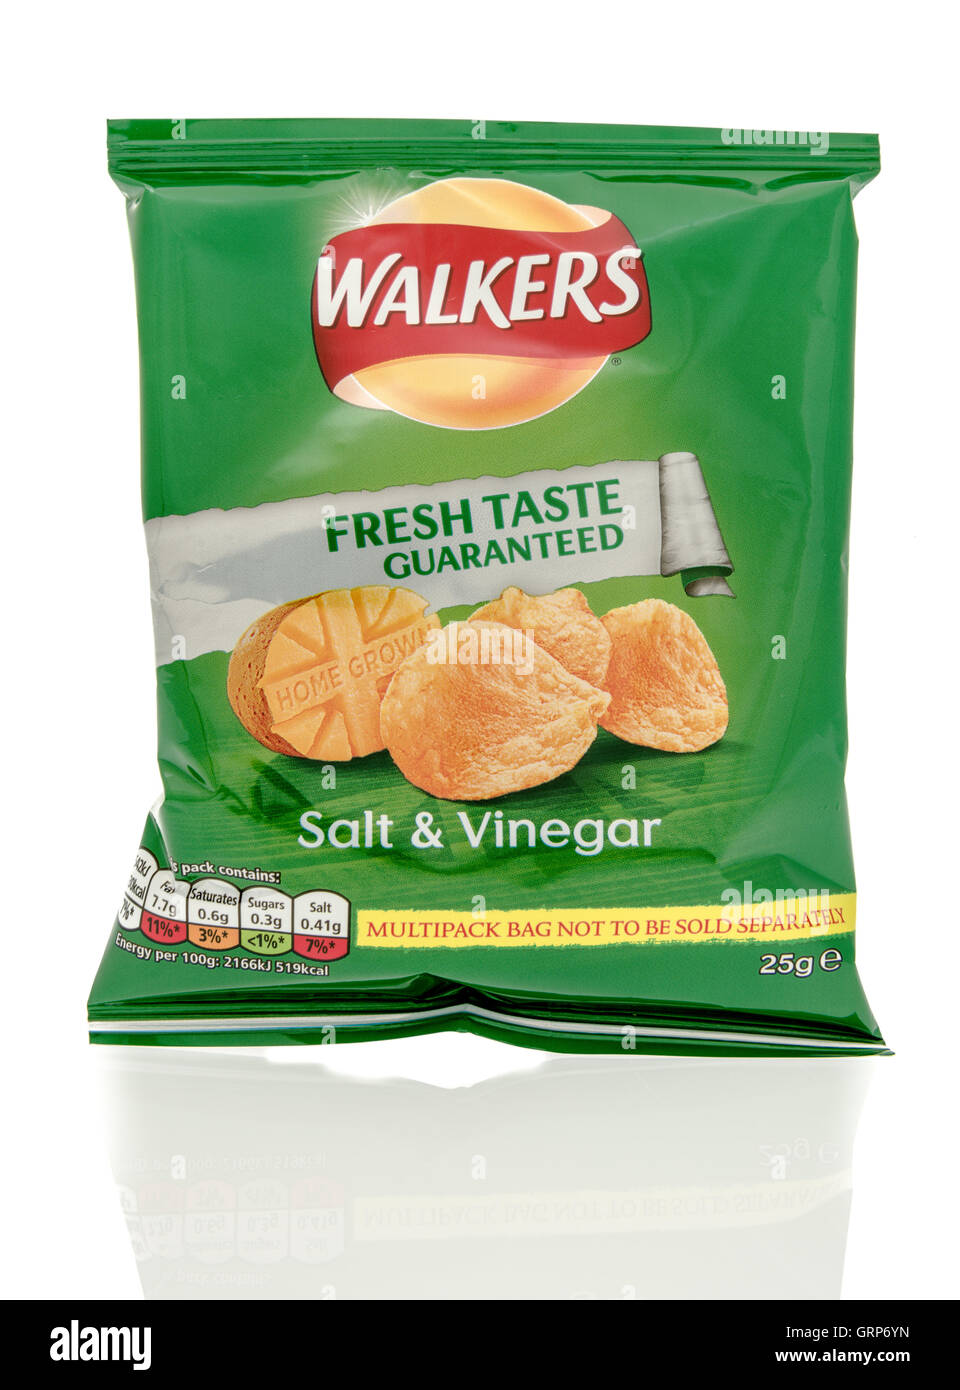 Winneconne, WI - 23 July 2016: Bag of Walkers salt & vinegar chips on an  isolated background Stock Photo - Alamy